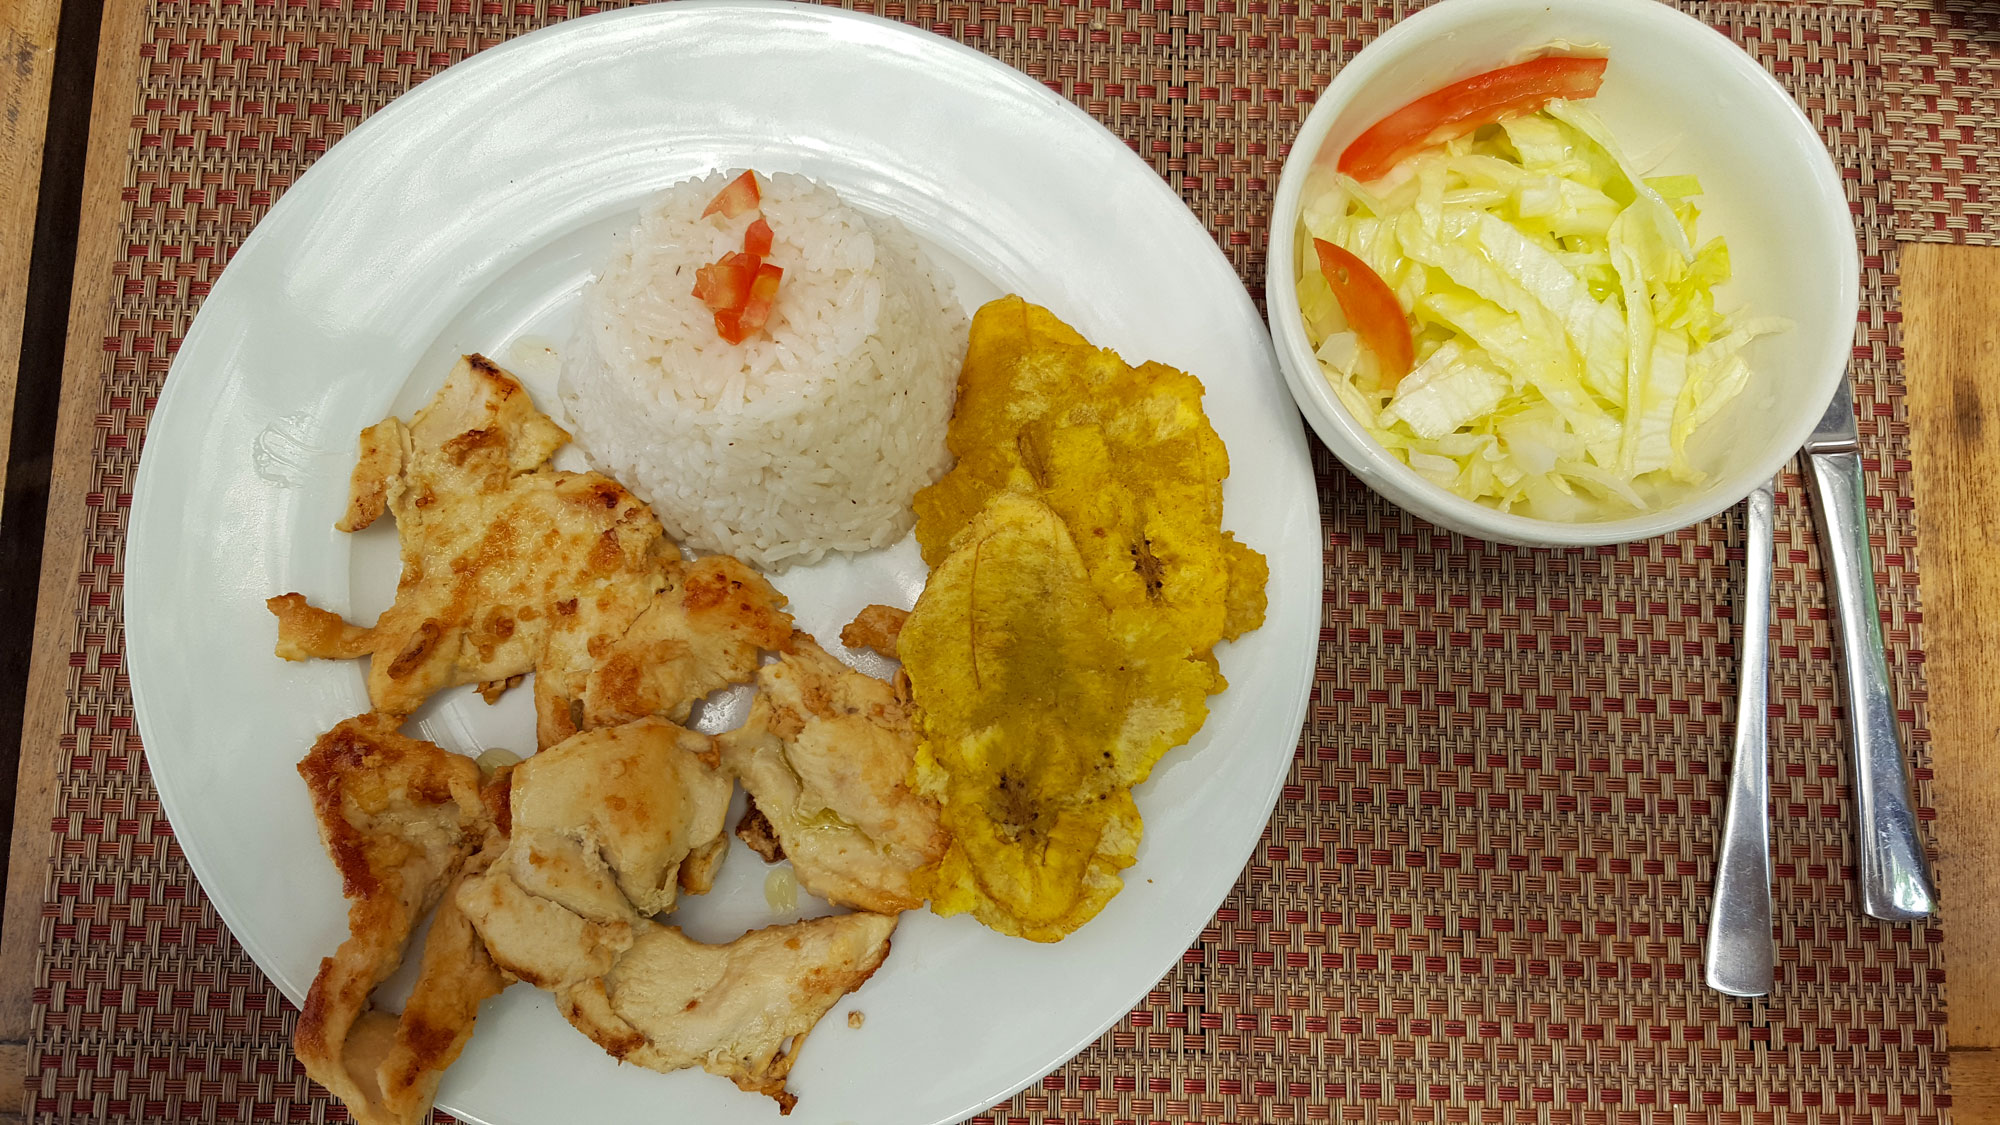 Michael's meal: salad, chicken, plantains, rice